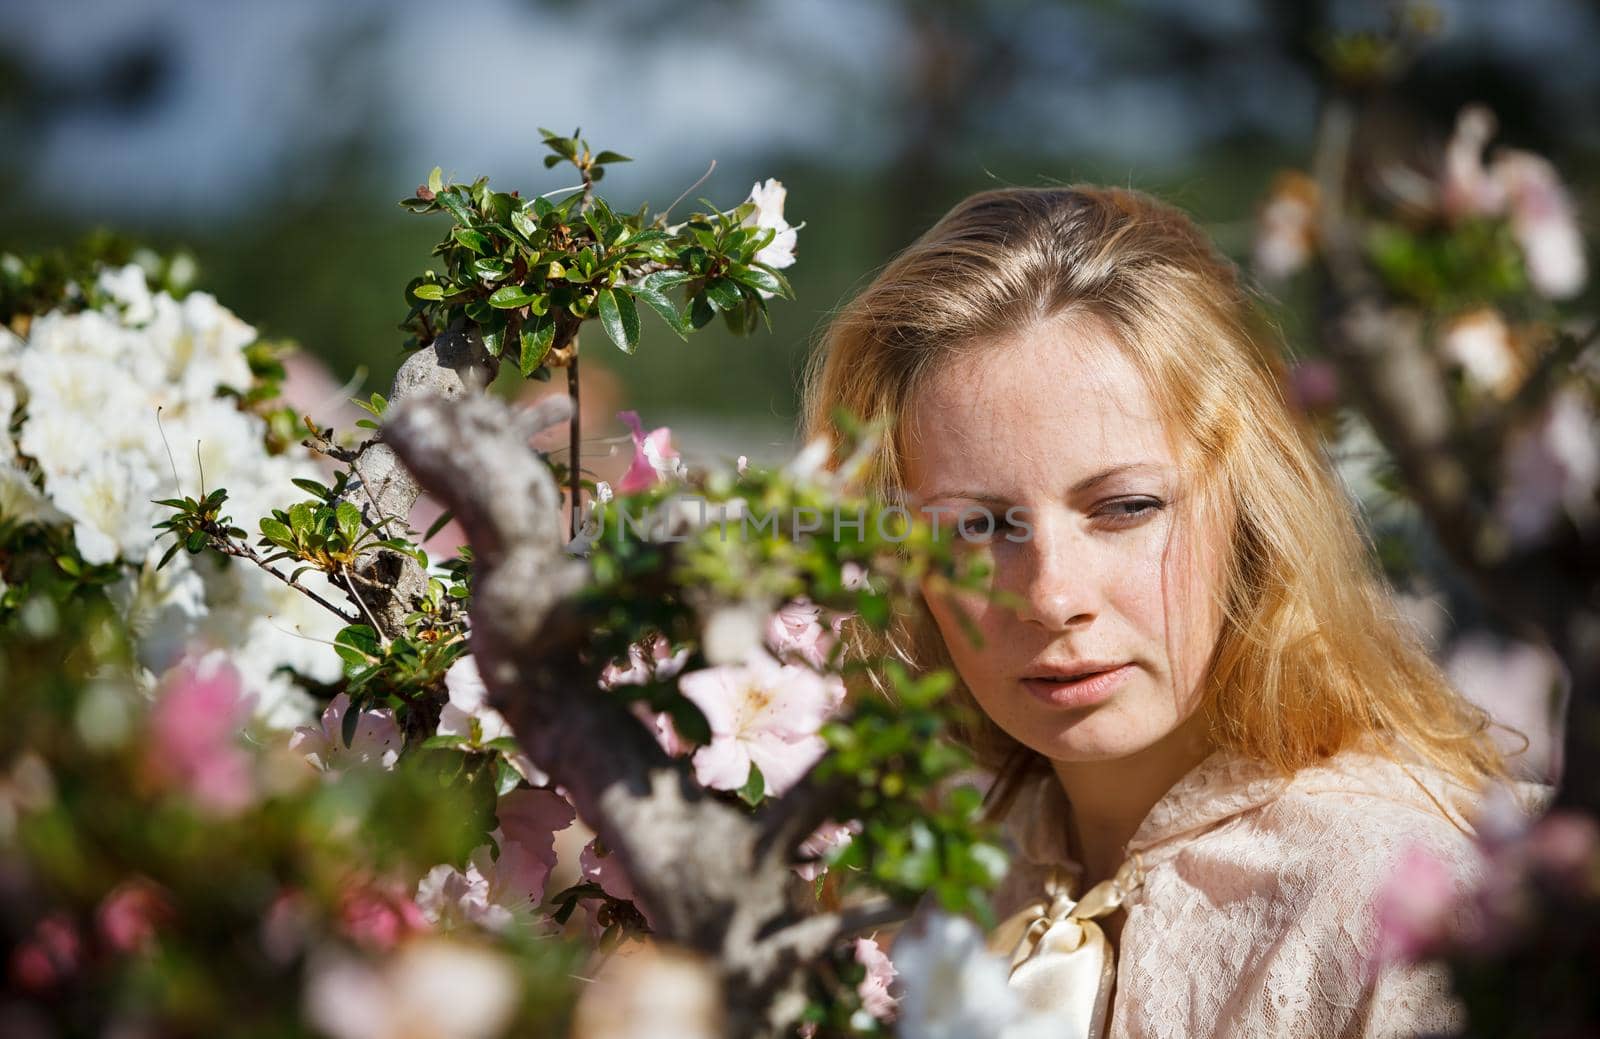 Portrait of a blond girl among the flowers of azalea in the rays of sunlight